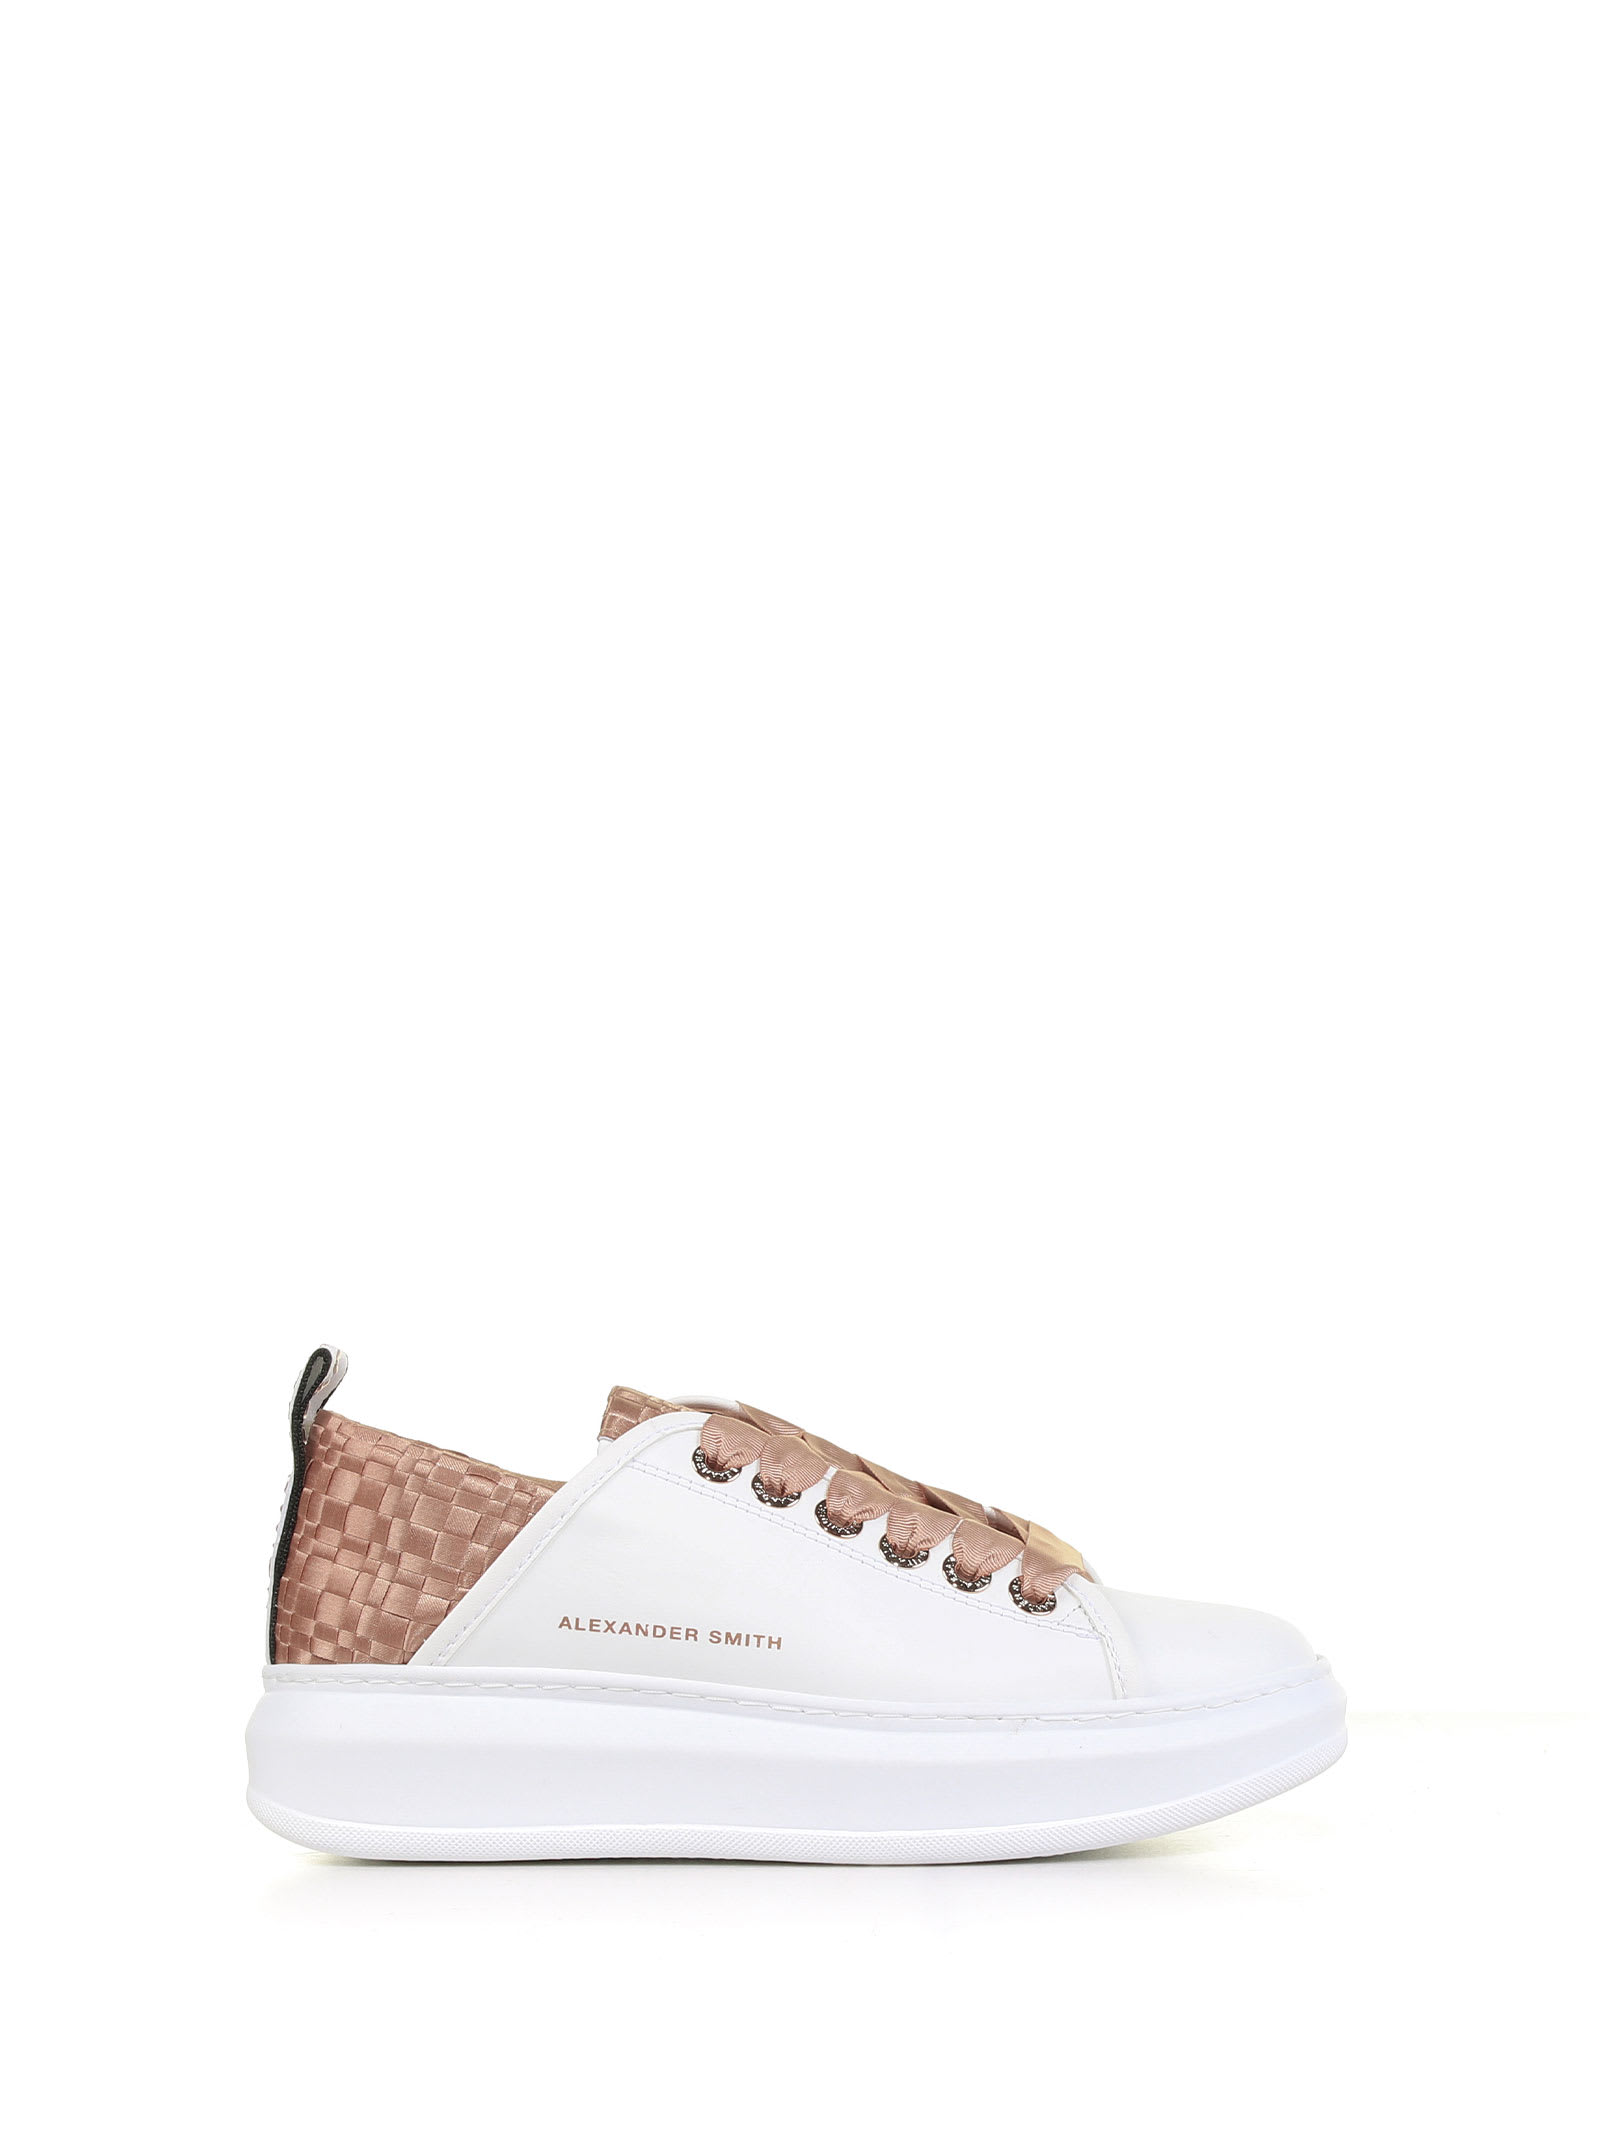 Alexander Smith London Wembley Sneaker With Satin Detail